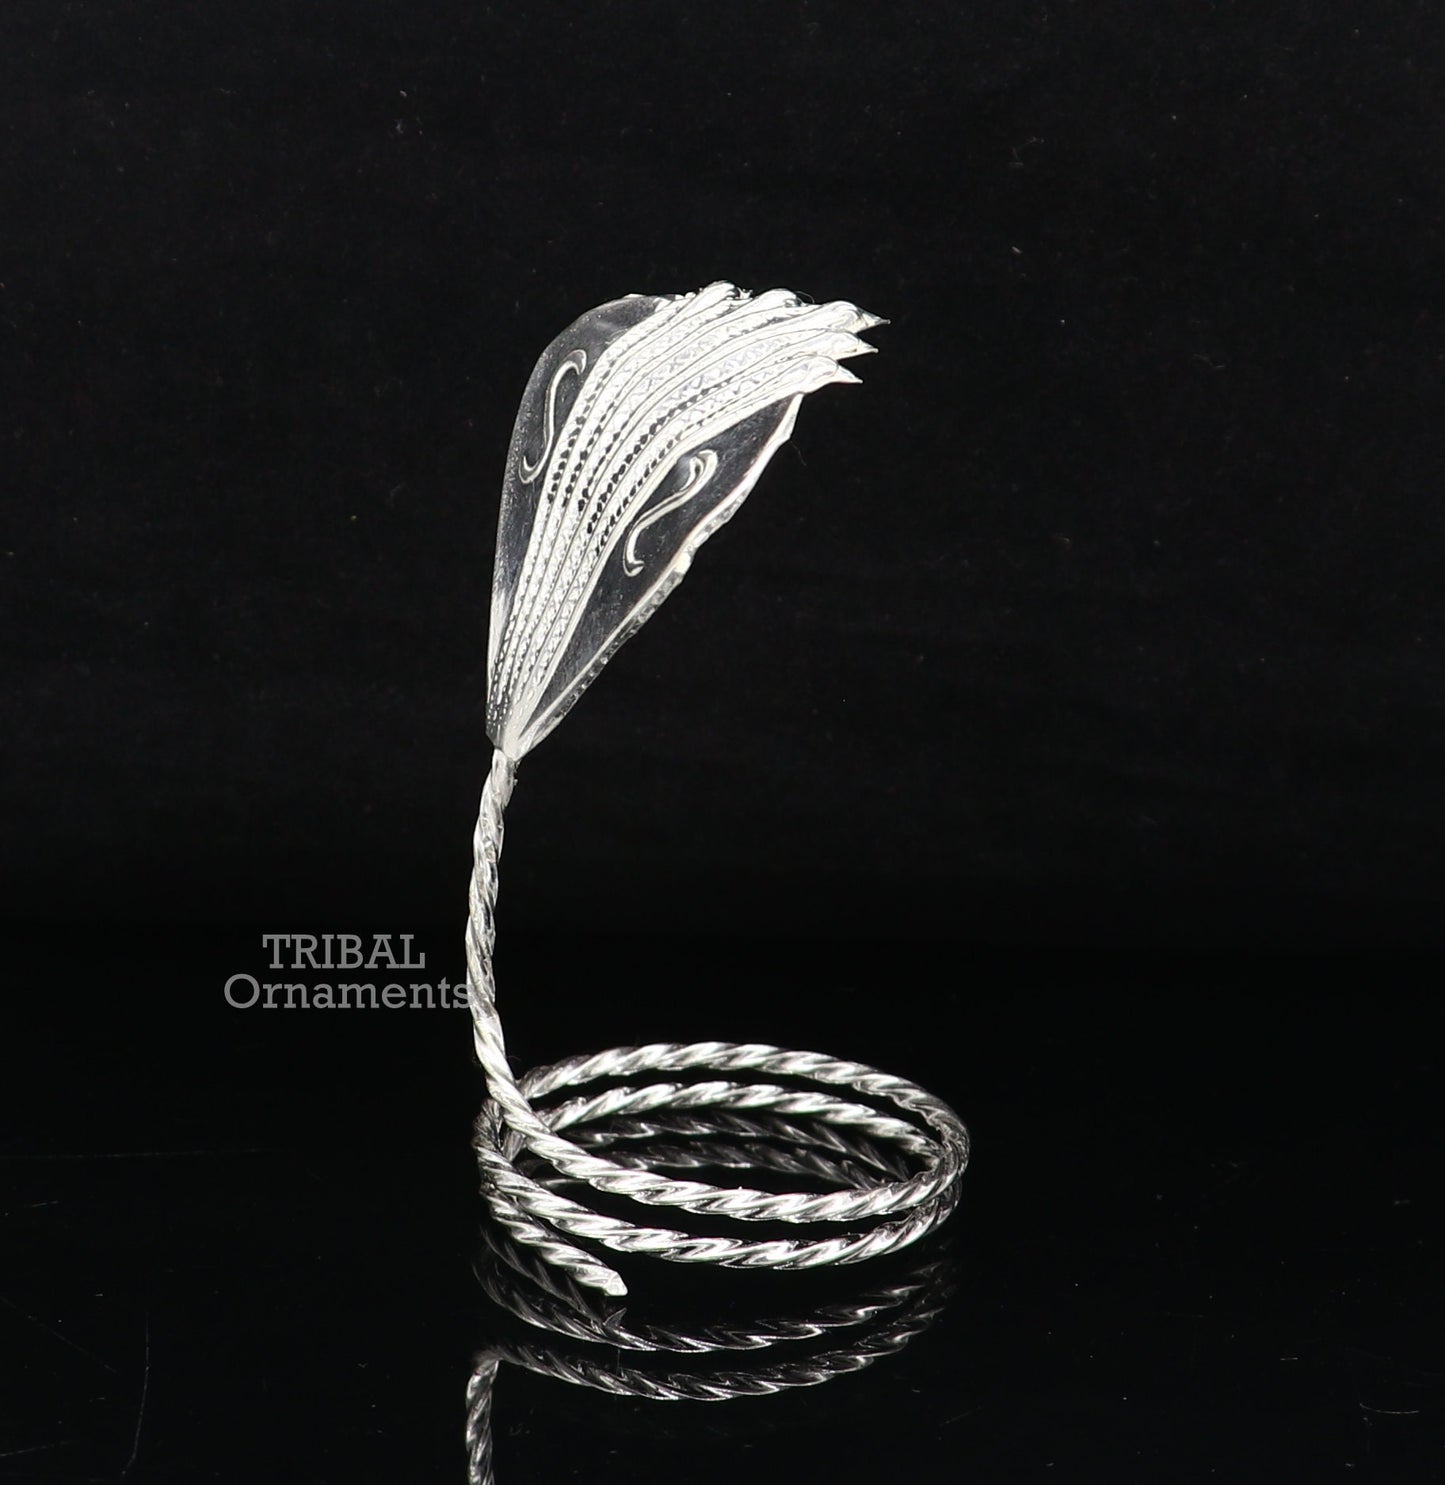 Solid silver handmade Divine Sheshnag mini panchmukhi snake or shiva snake for puja or worshipping, solid Diwali puja article su740 - TRIBAL ORNAMENTS